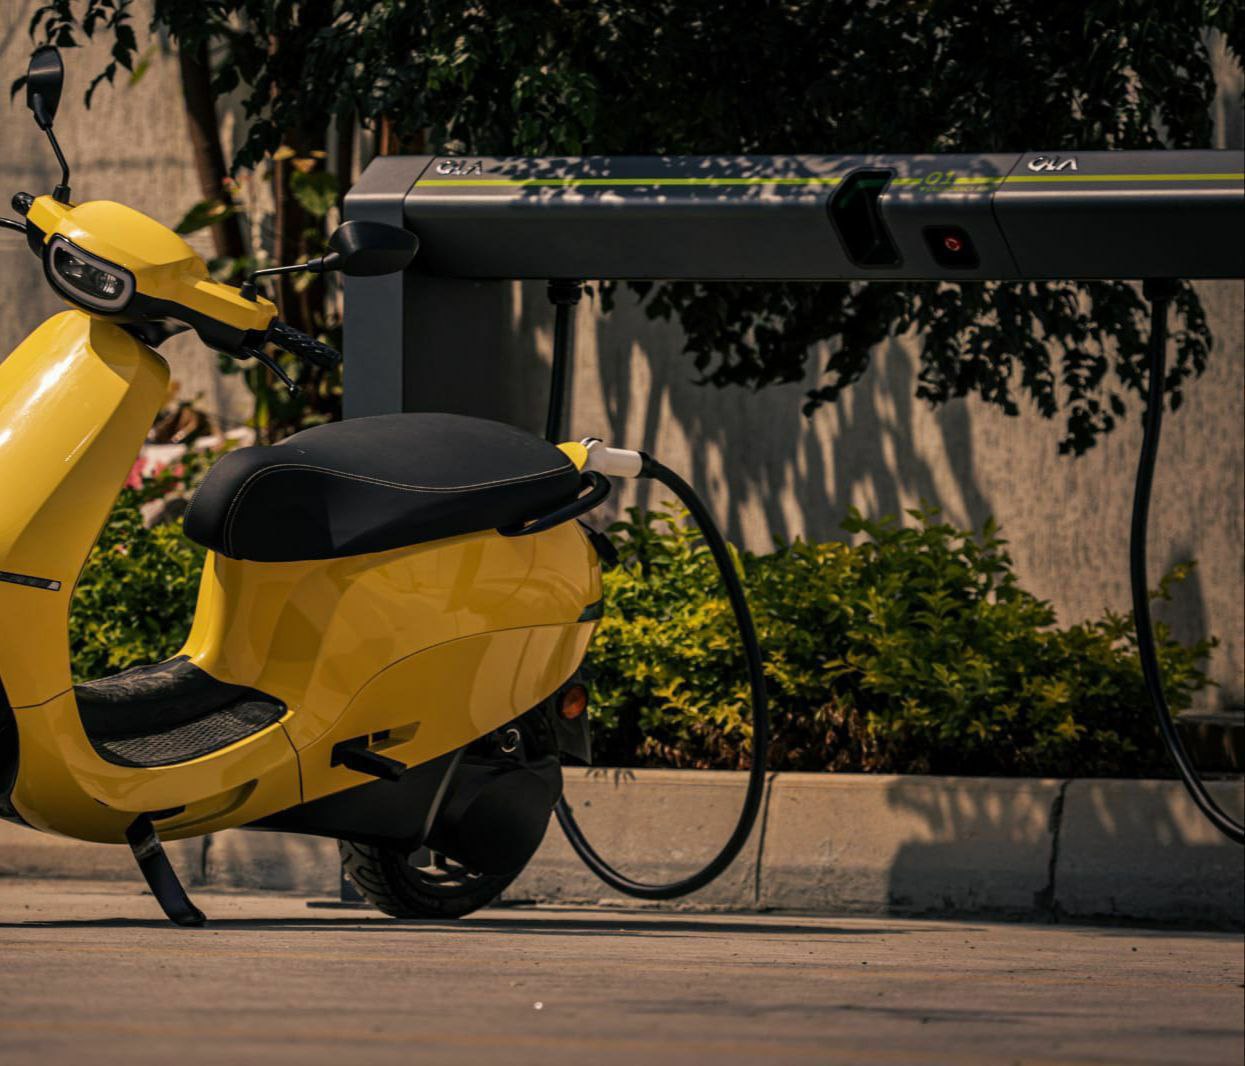 https://e-vehicleinfo.com/pros-and-cons-of-ola-electric-scooter/